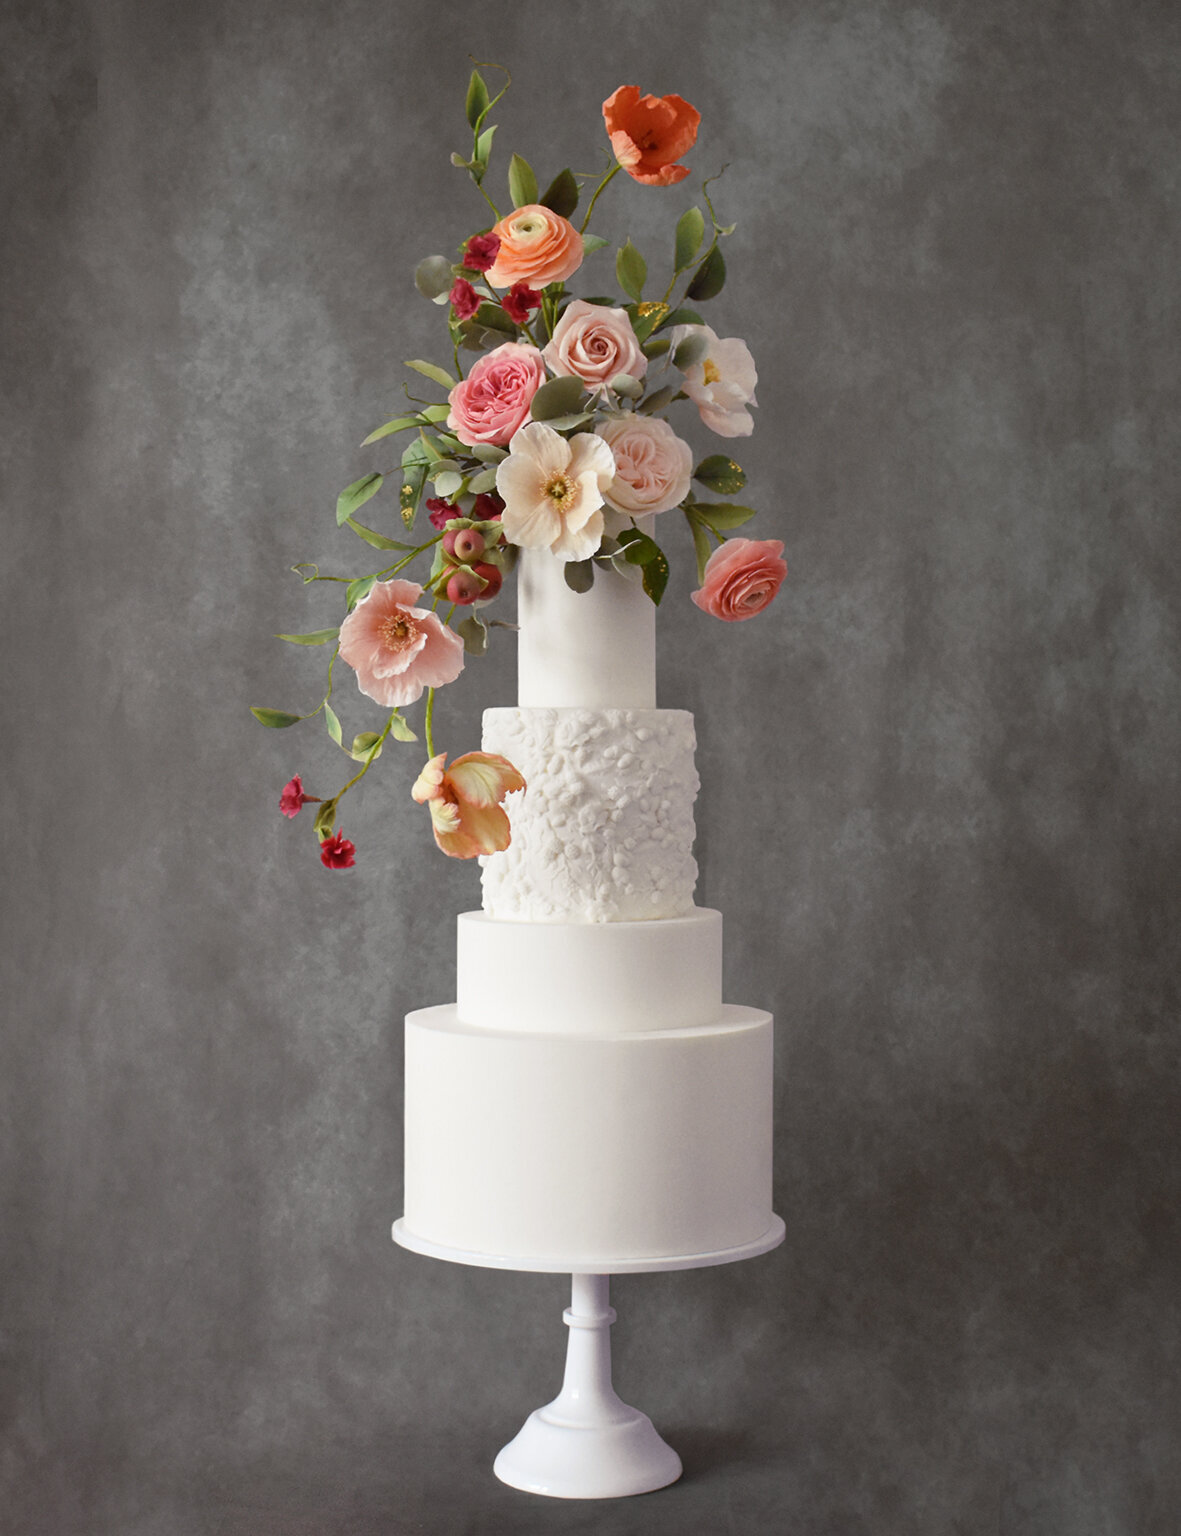 Beautiful four tiered wedding cake with bas relief floral details and a dramatic display of Dutch Master style sugar flowers